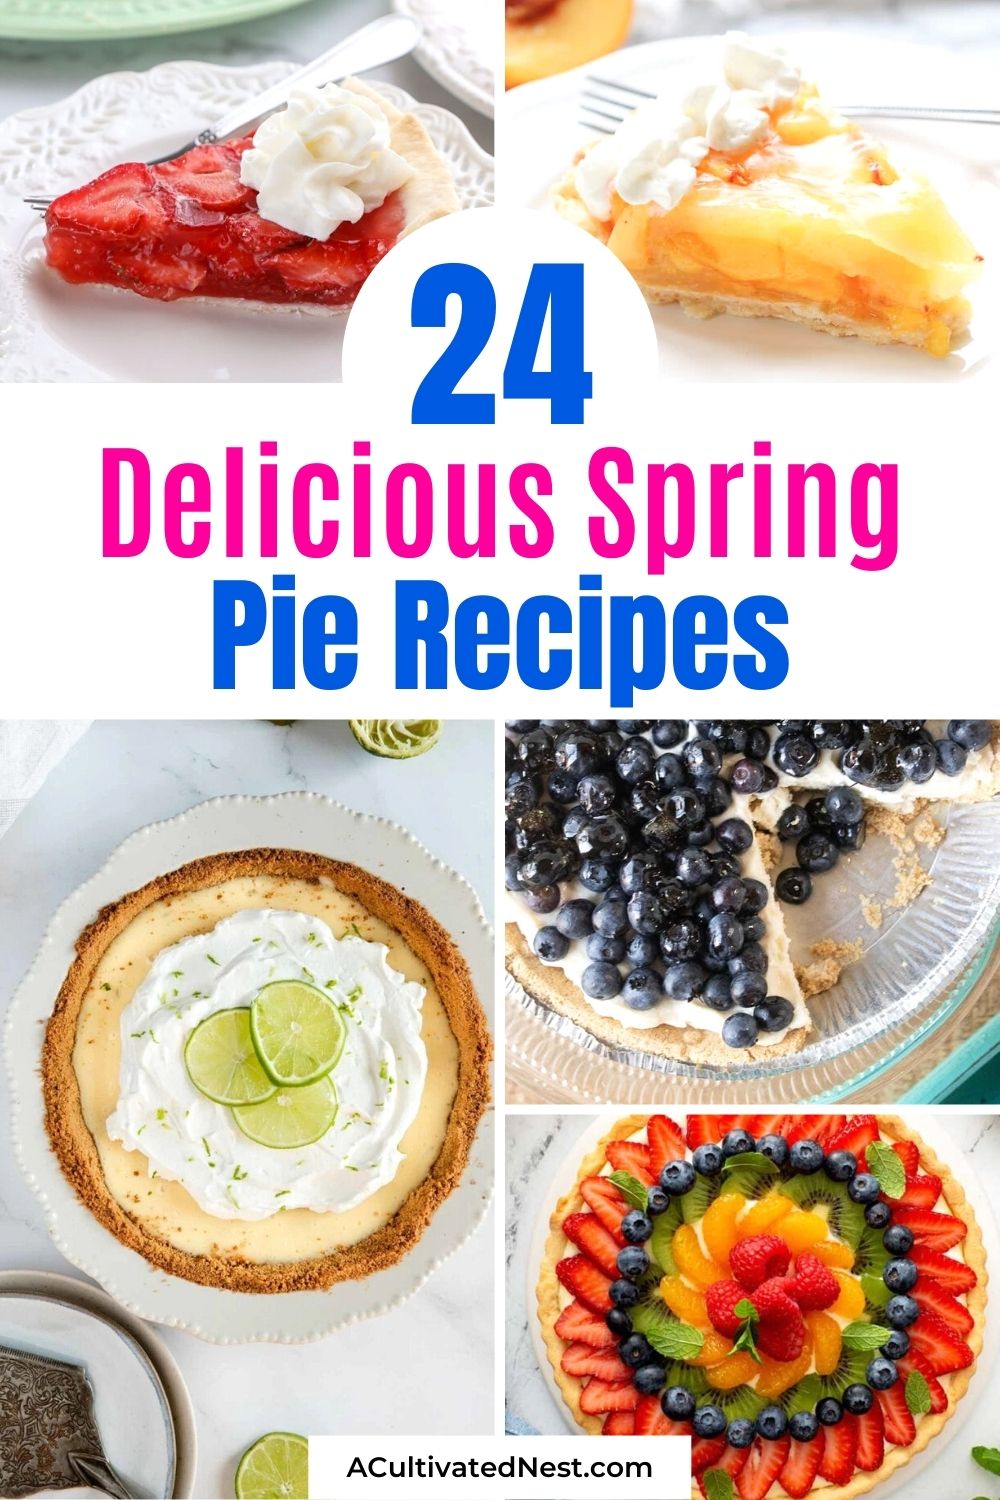 24 Delicious Pie Recipes For Spring- If you want a delicious treat to enjoy this spring, then you need to check out these delicious pie recipes for spring! There are so many tasty pies you can make using seasonal fruits and berries! | spring dessert recipes, spring recipes, recipes using fresh fruit, recipes using fresh berries, #pie #pieRecipes #dessertRecipes #desserts #ACultivatedNest